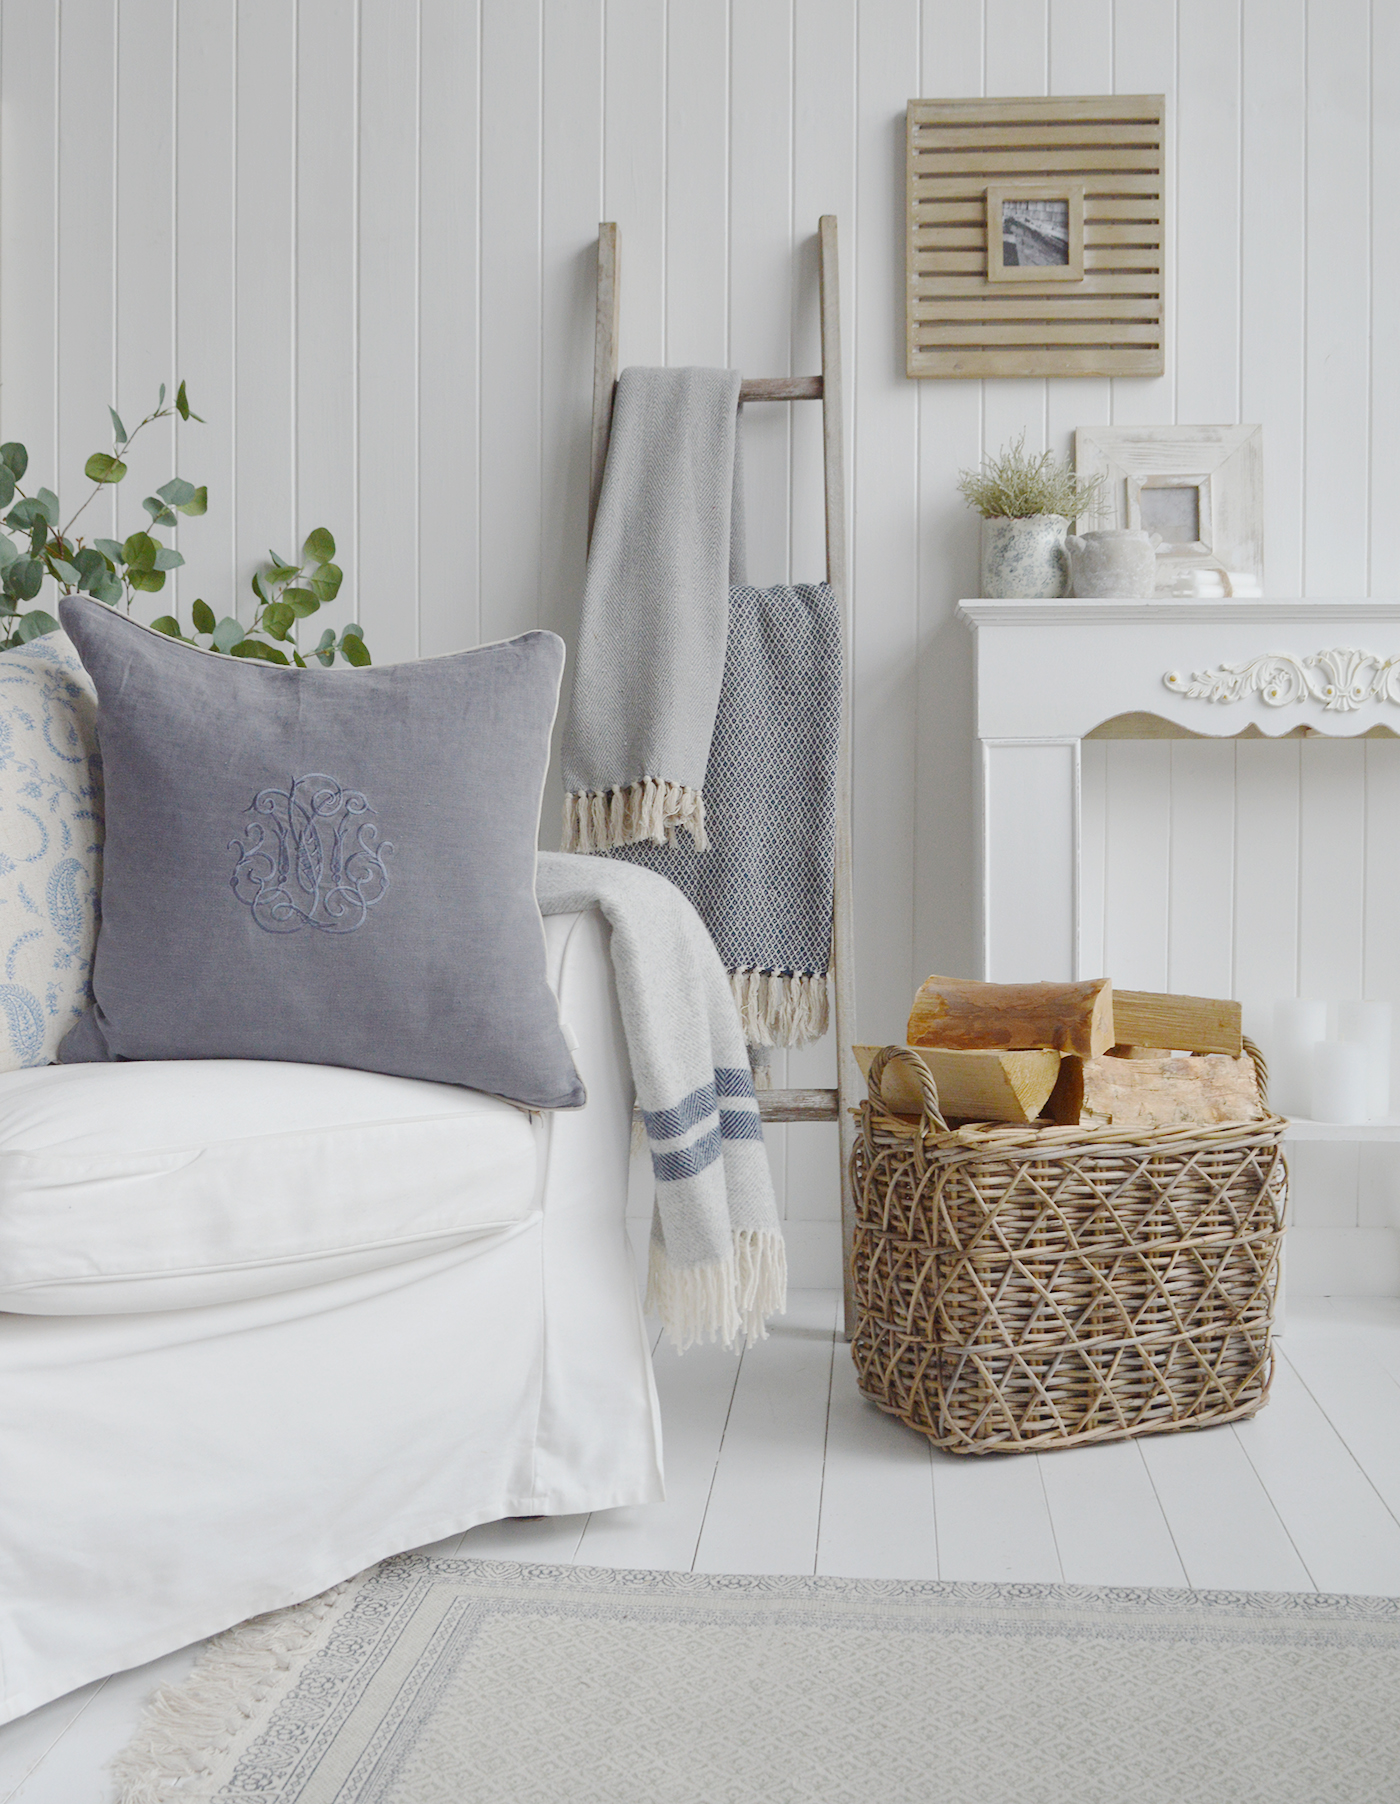 A living room in whites and neutral colours, baskets to add netural texture and soft furnishings including throws ans luxury cushions to add warmth. The wooden ladder is perfect in a modern farmhouse or country home to add blankets and some height in styling